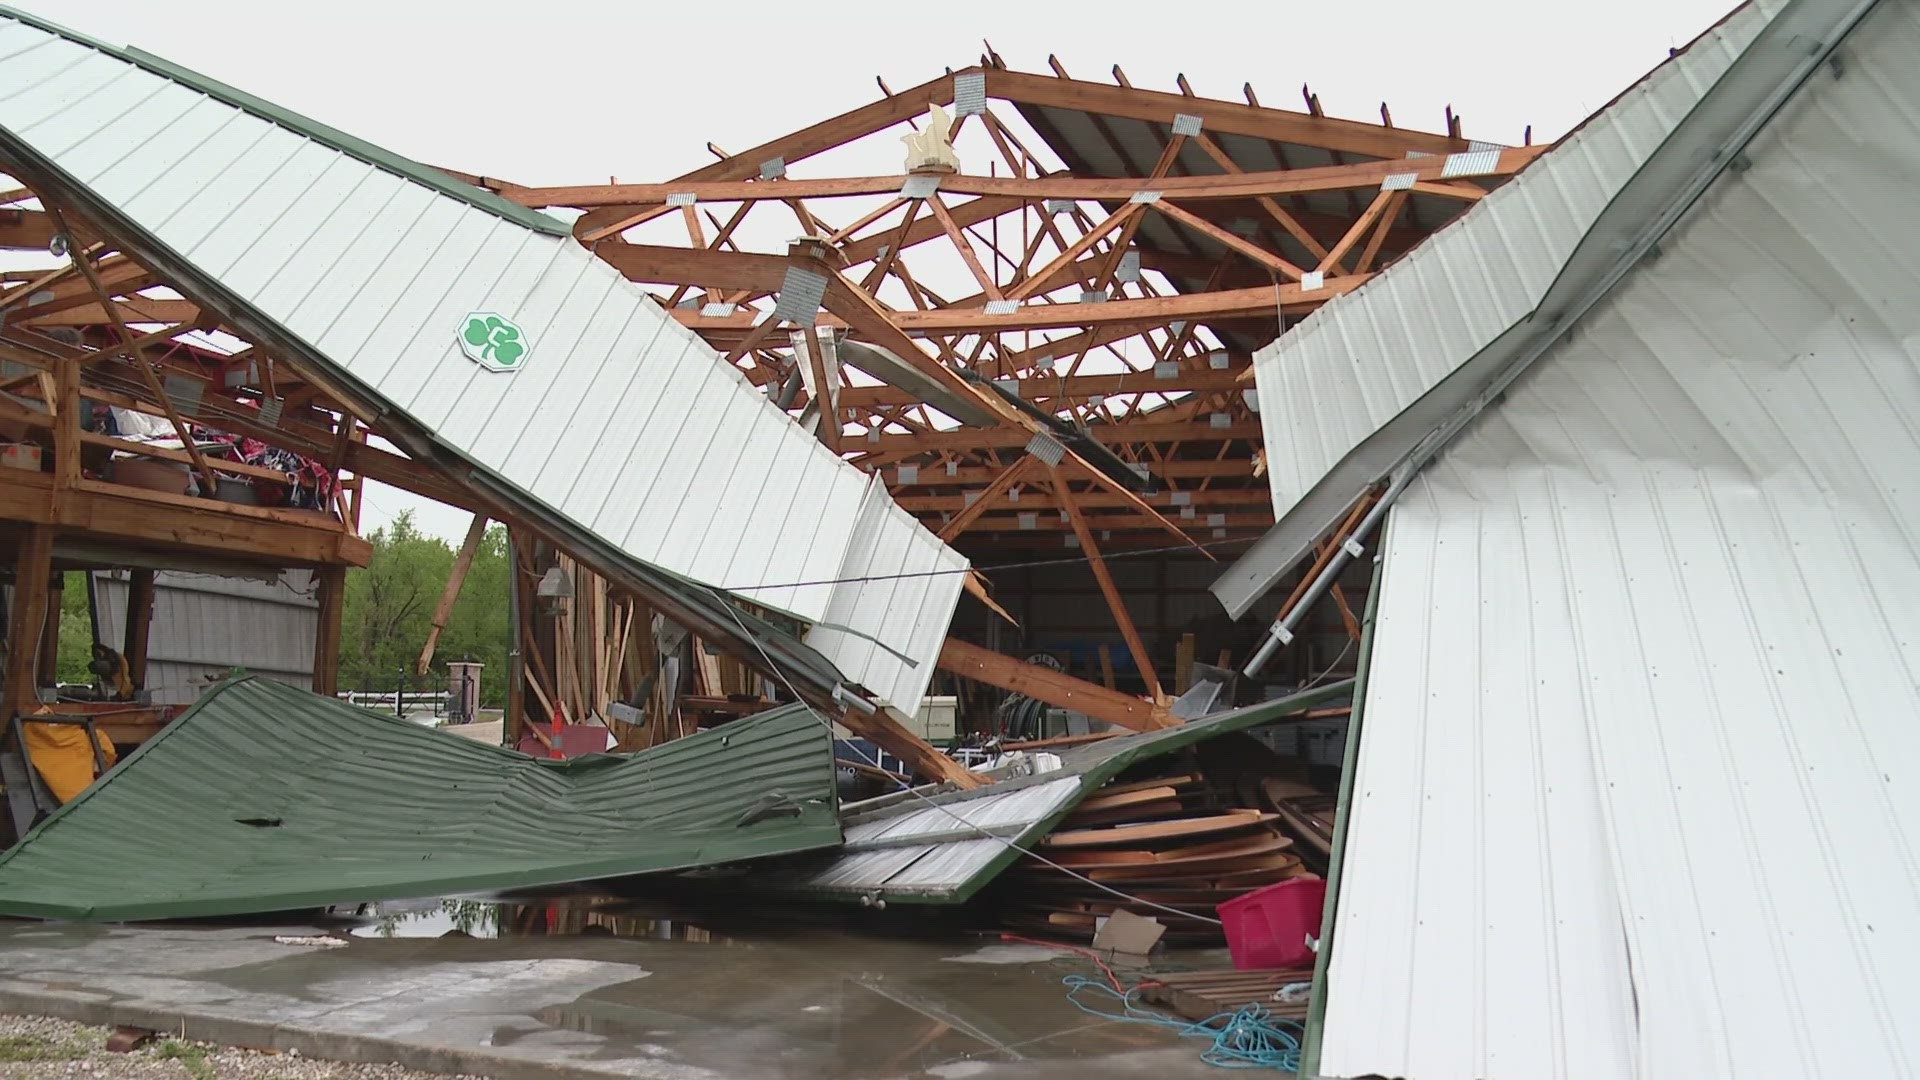 Officials confirmed a tornado touched down Thursday night near Brookdale Farms in Jefferson County. National Weather Service will look assess damage there Friday.